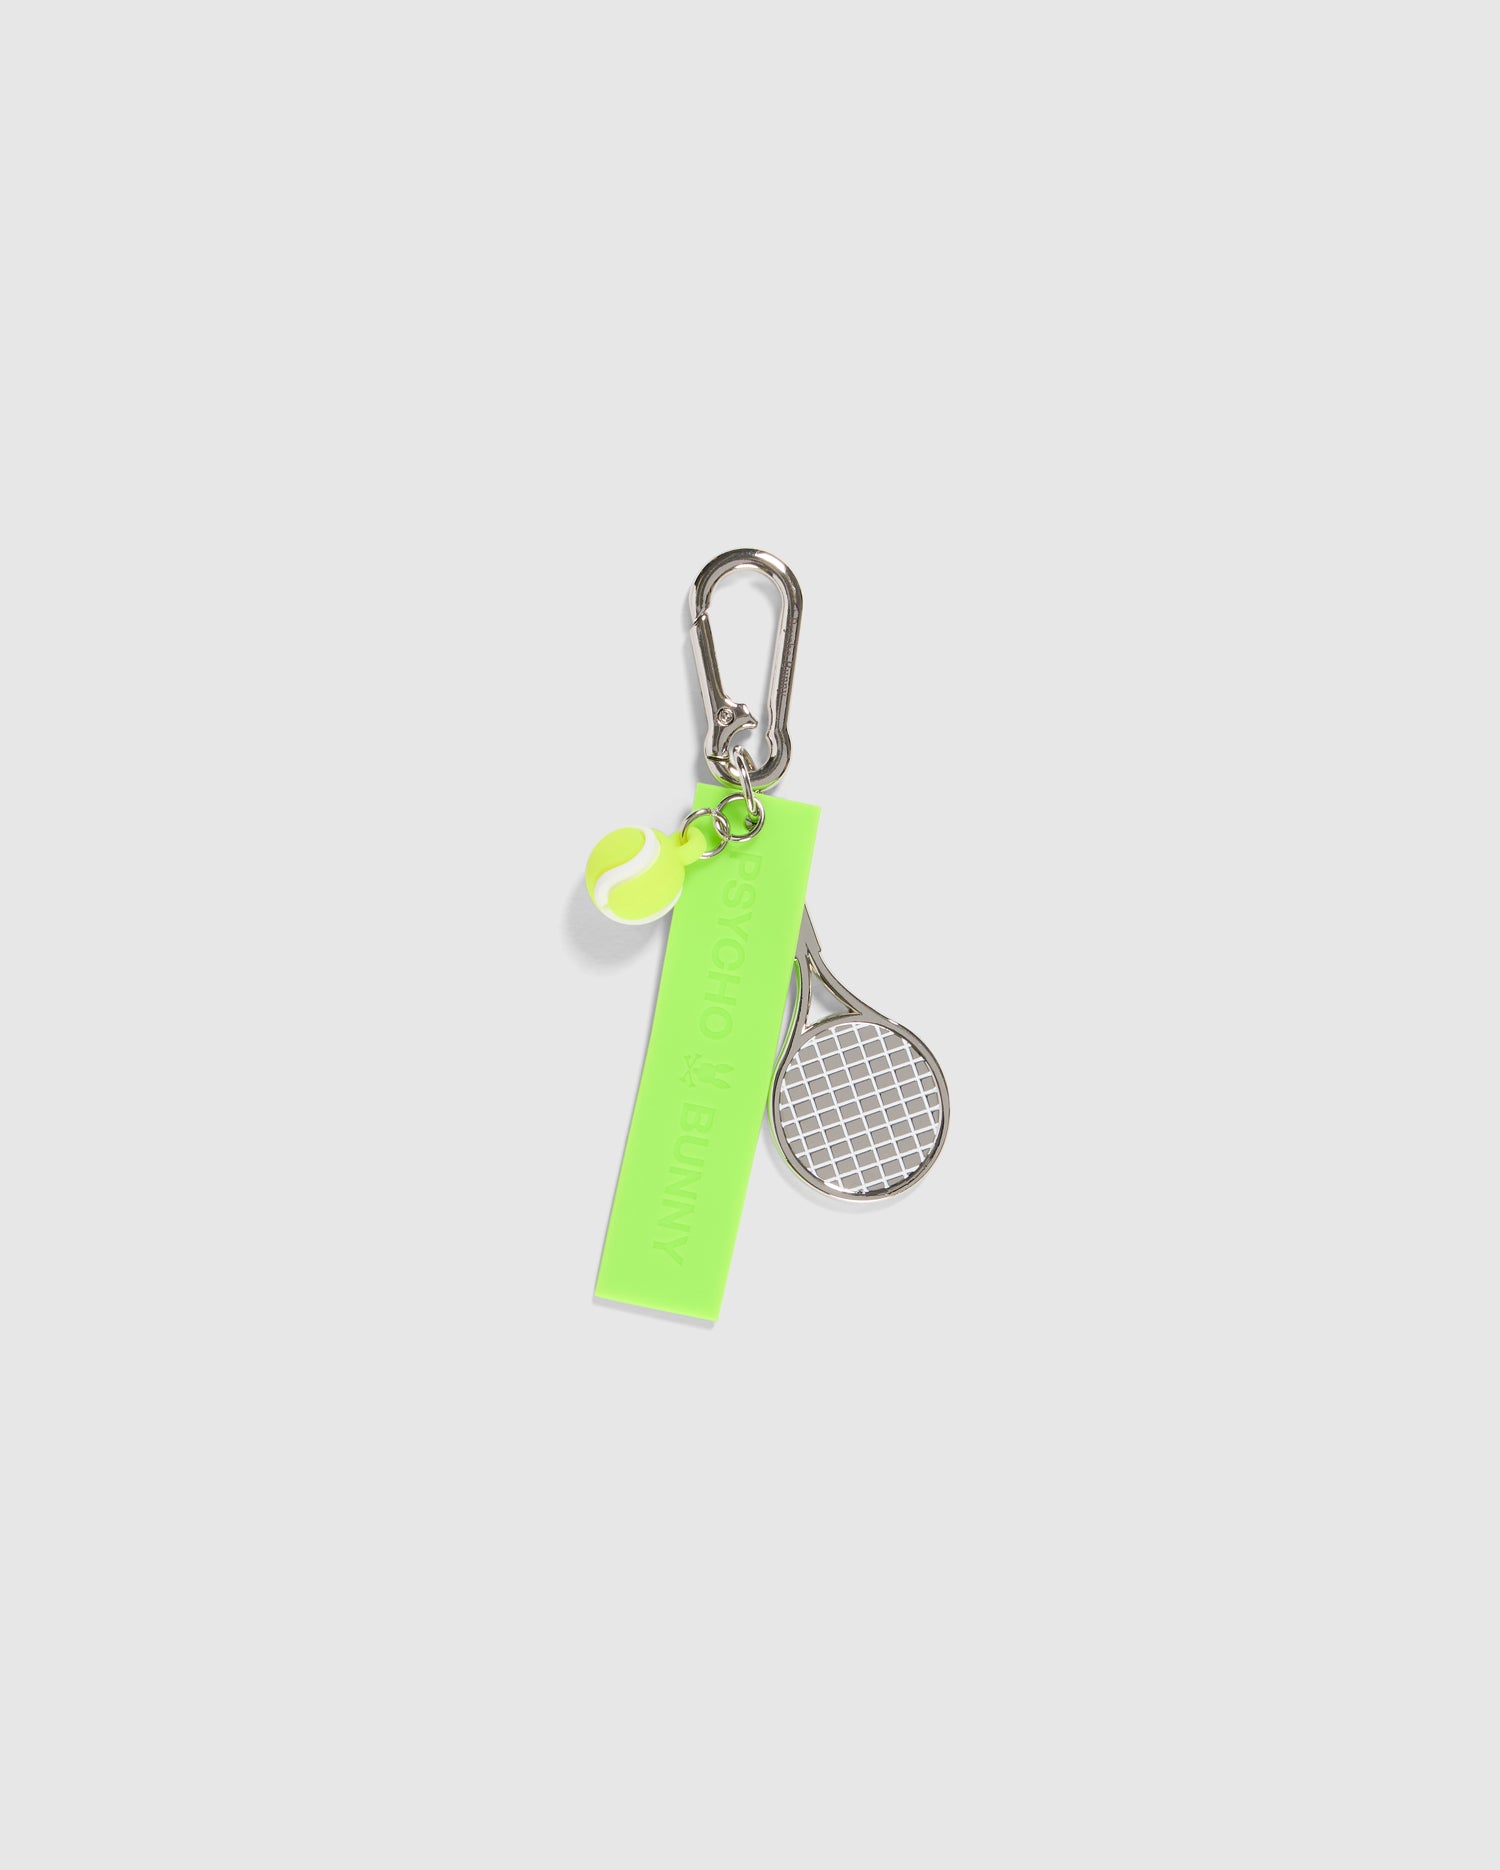 A Psycho Bunny TENNIS LONG KEYCHAIN - B6A705C200 featuring a bright green rectangular tag, a small tennis racket charm, and a neon green tennis ball charm. The tag has text on it, and the carabiner keychain is attached to a silver clip. All items are on a plain white background.